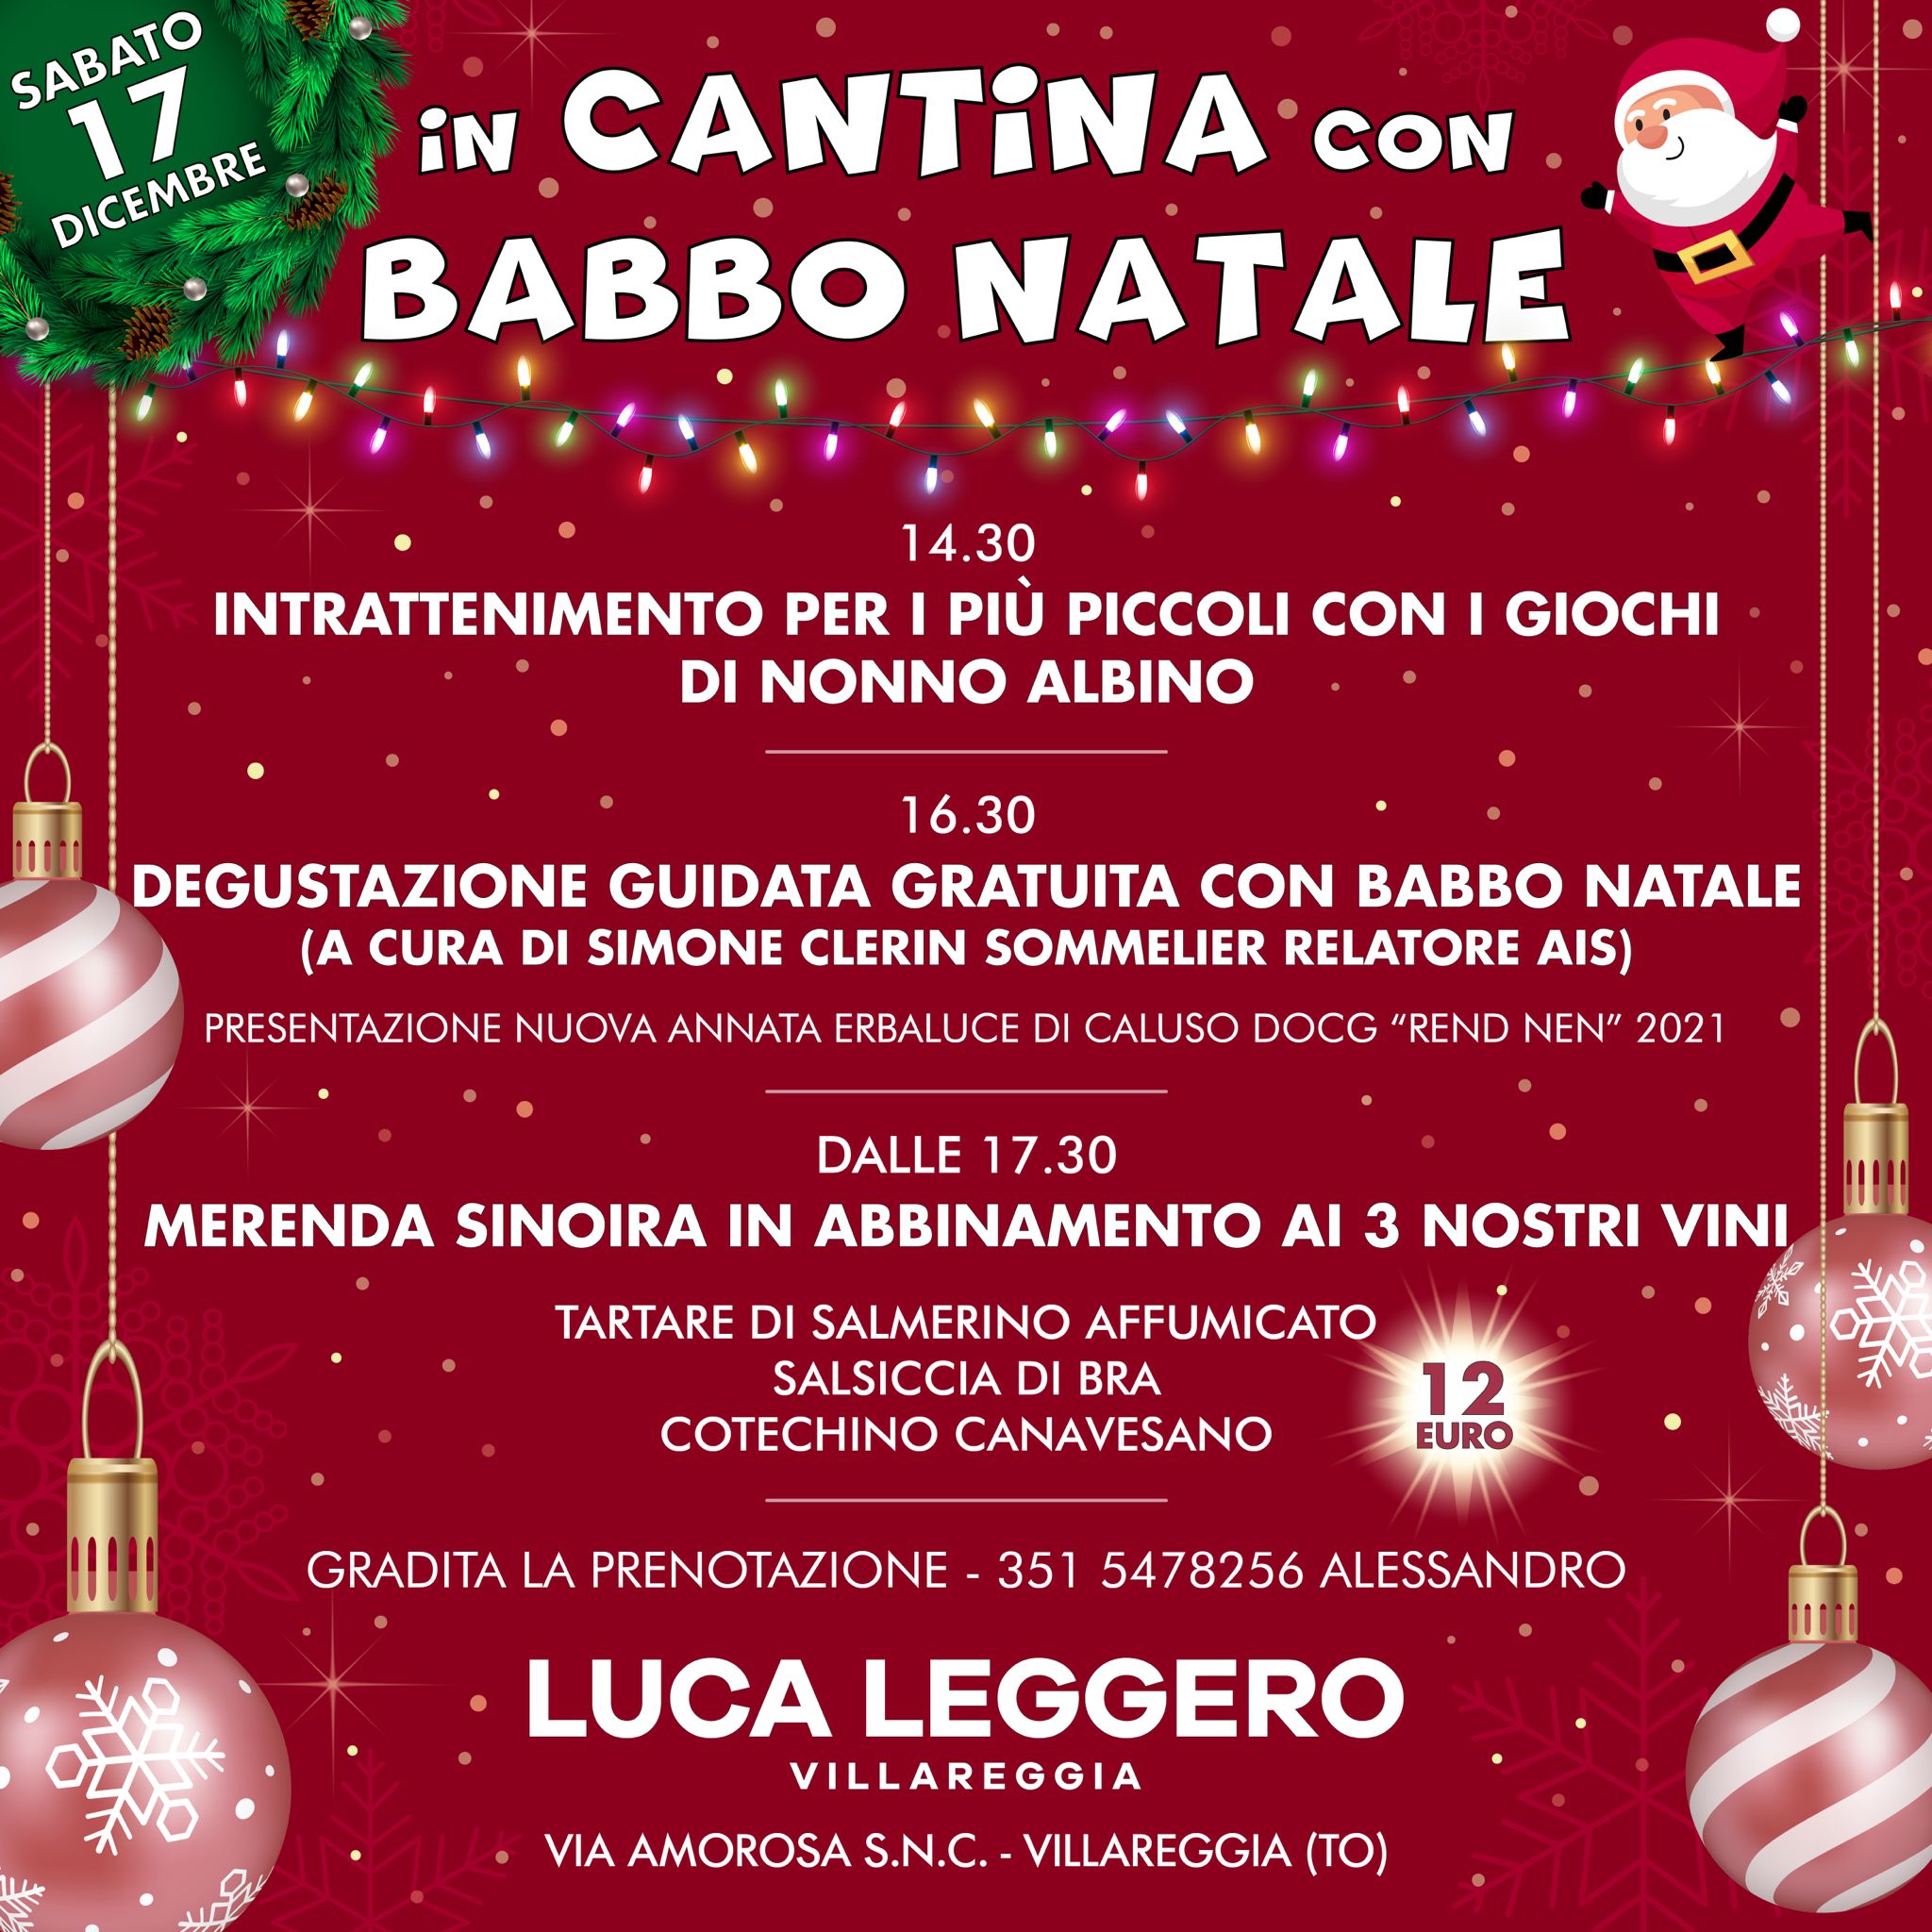 In cantina con Babbo natale